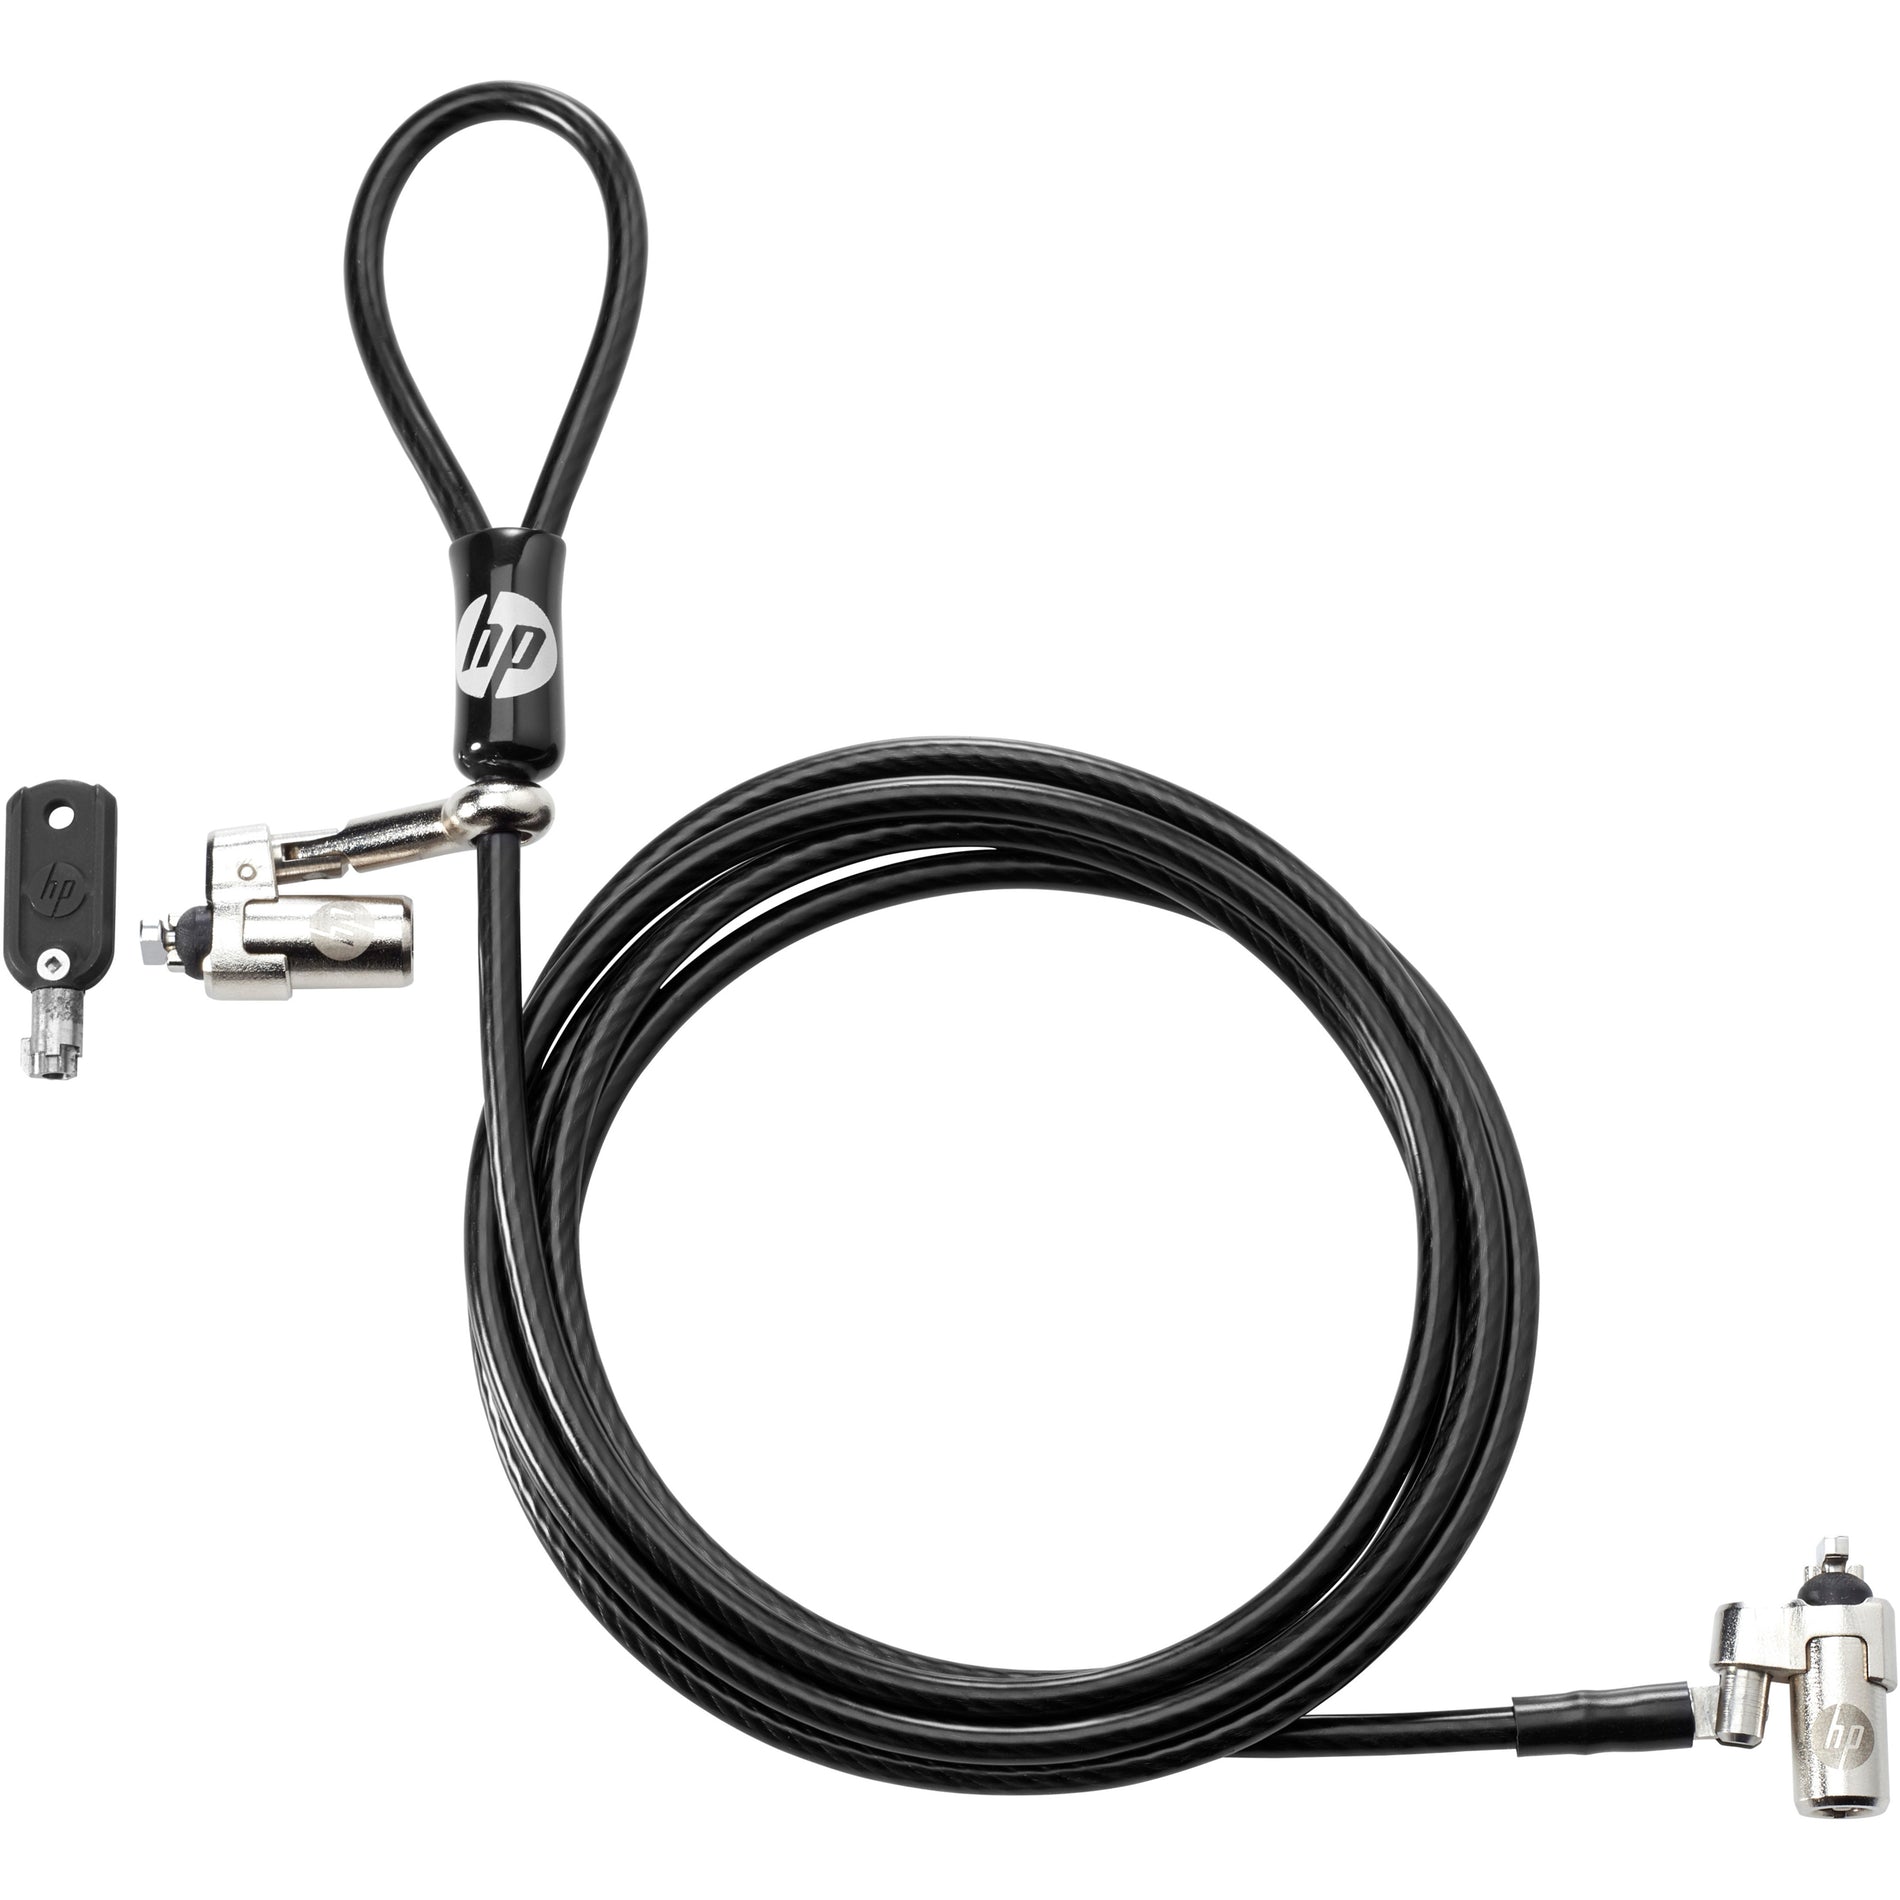 HP 1AJ40AA Nano Master Keyed Cable Lock, 6 ft Cable Length, Tablet Notebook Security